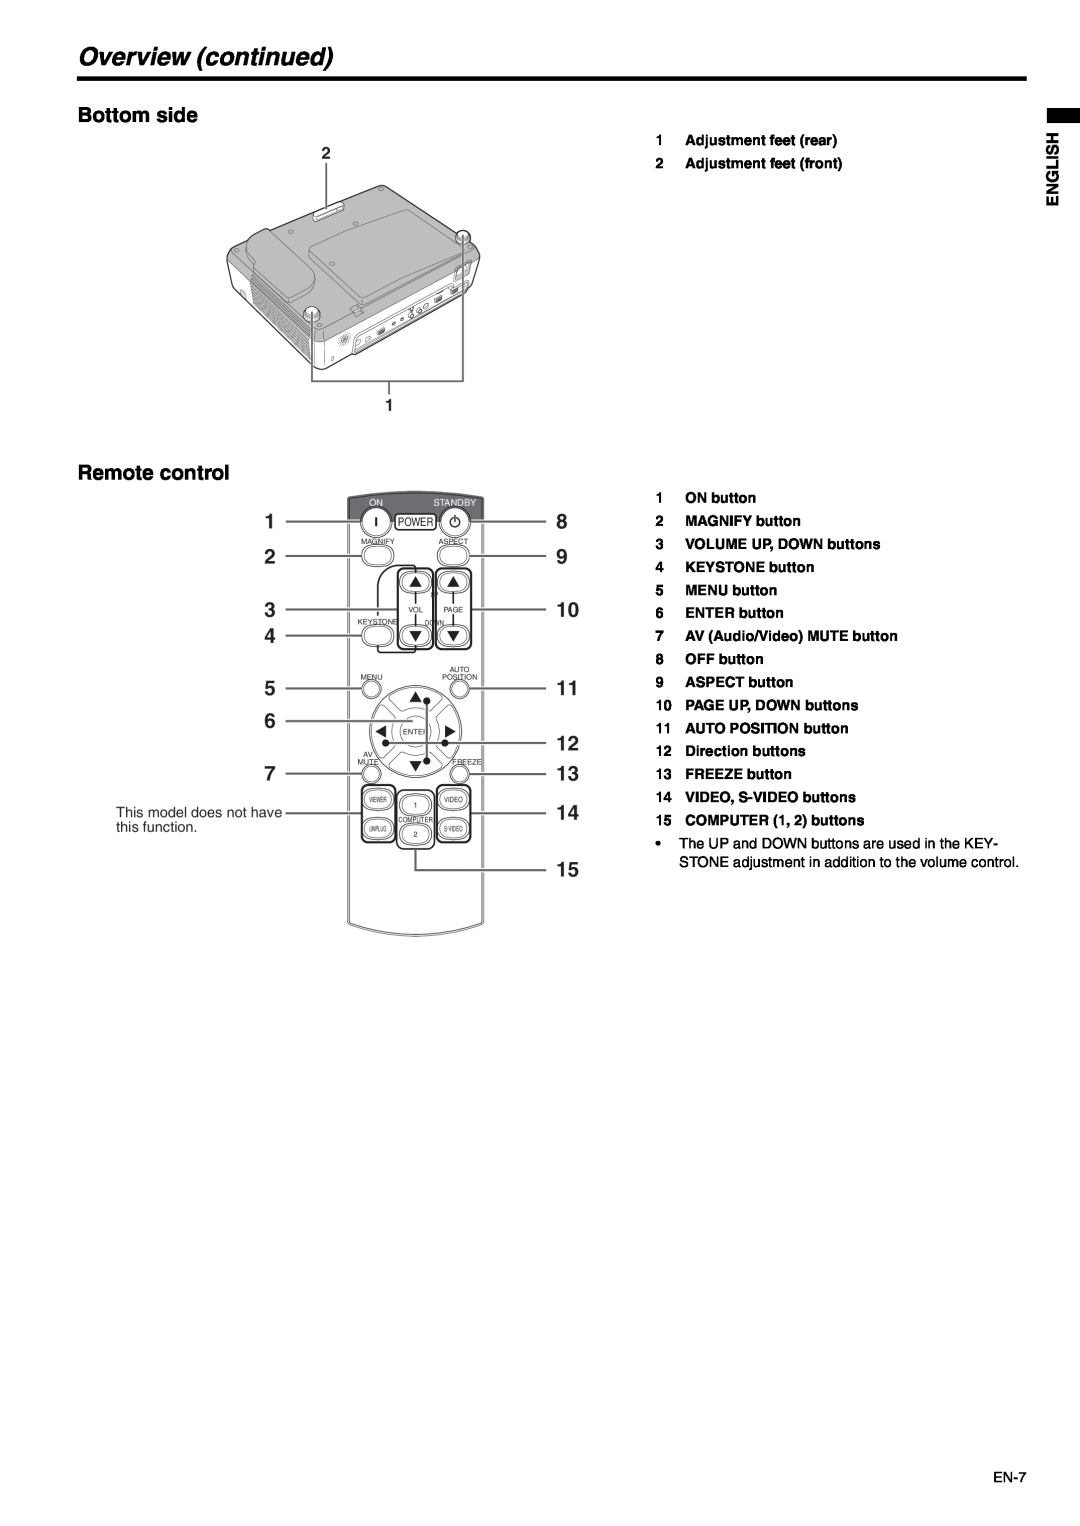 Mitsubishi Electronics XD500U-ST user manual Overview continued, Bottom side, Remote control, English 